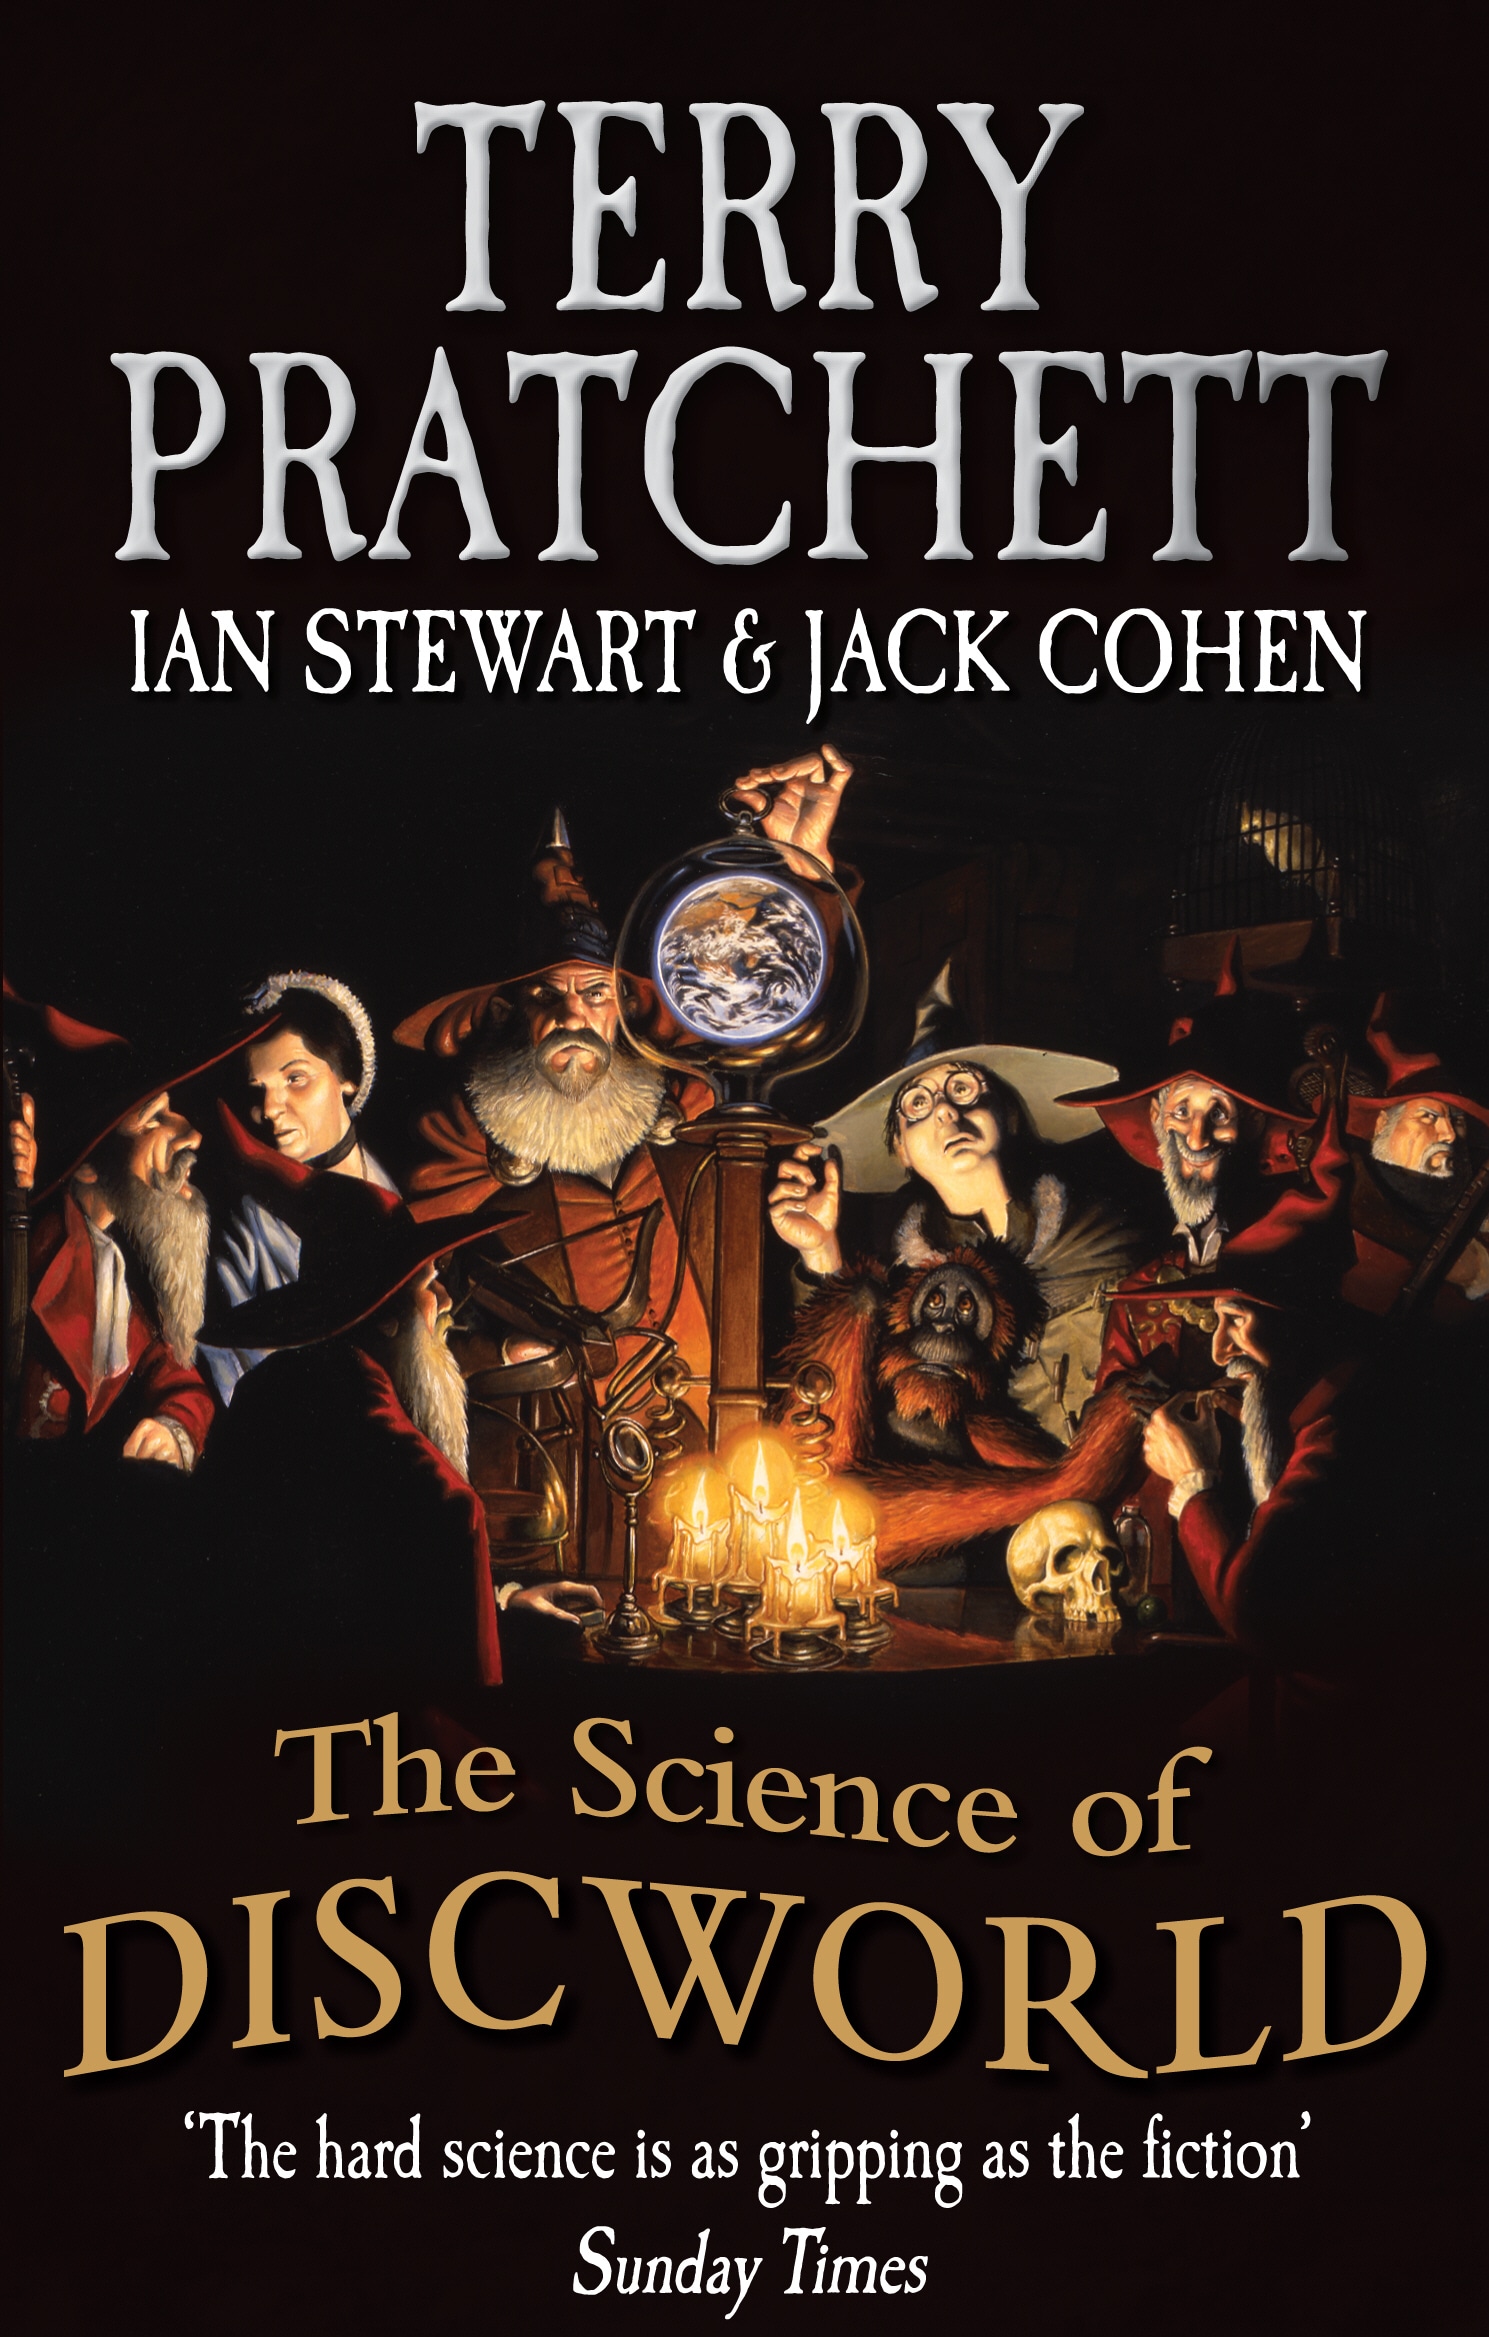 Book “The Science Of Discworld” by Terry Pratchett — April 11, 2013